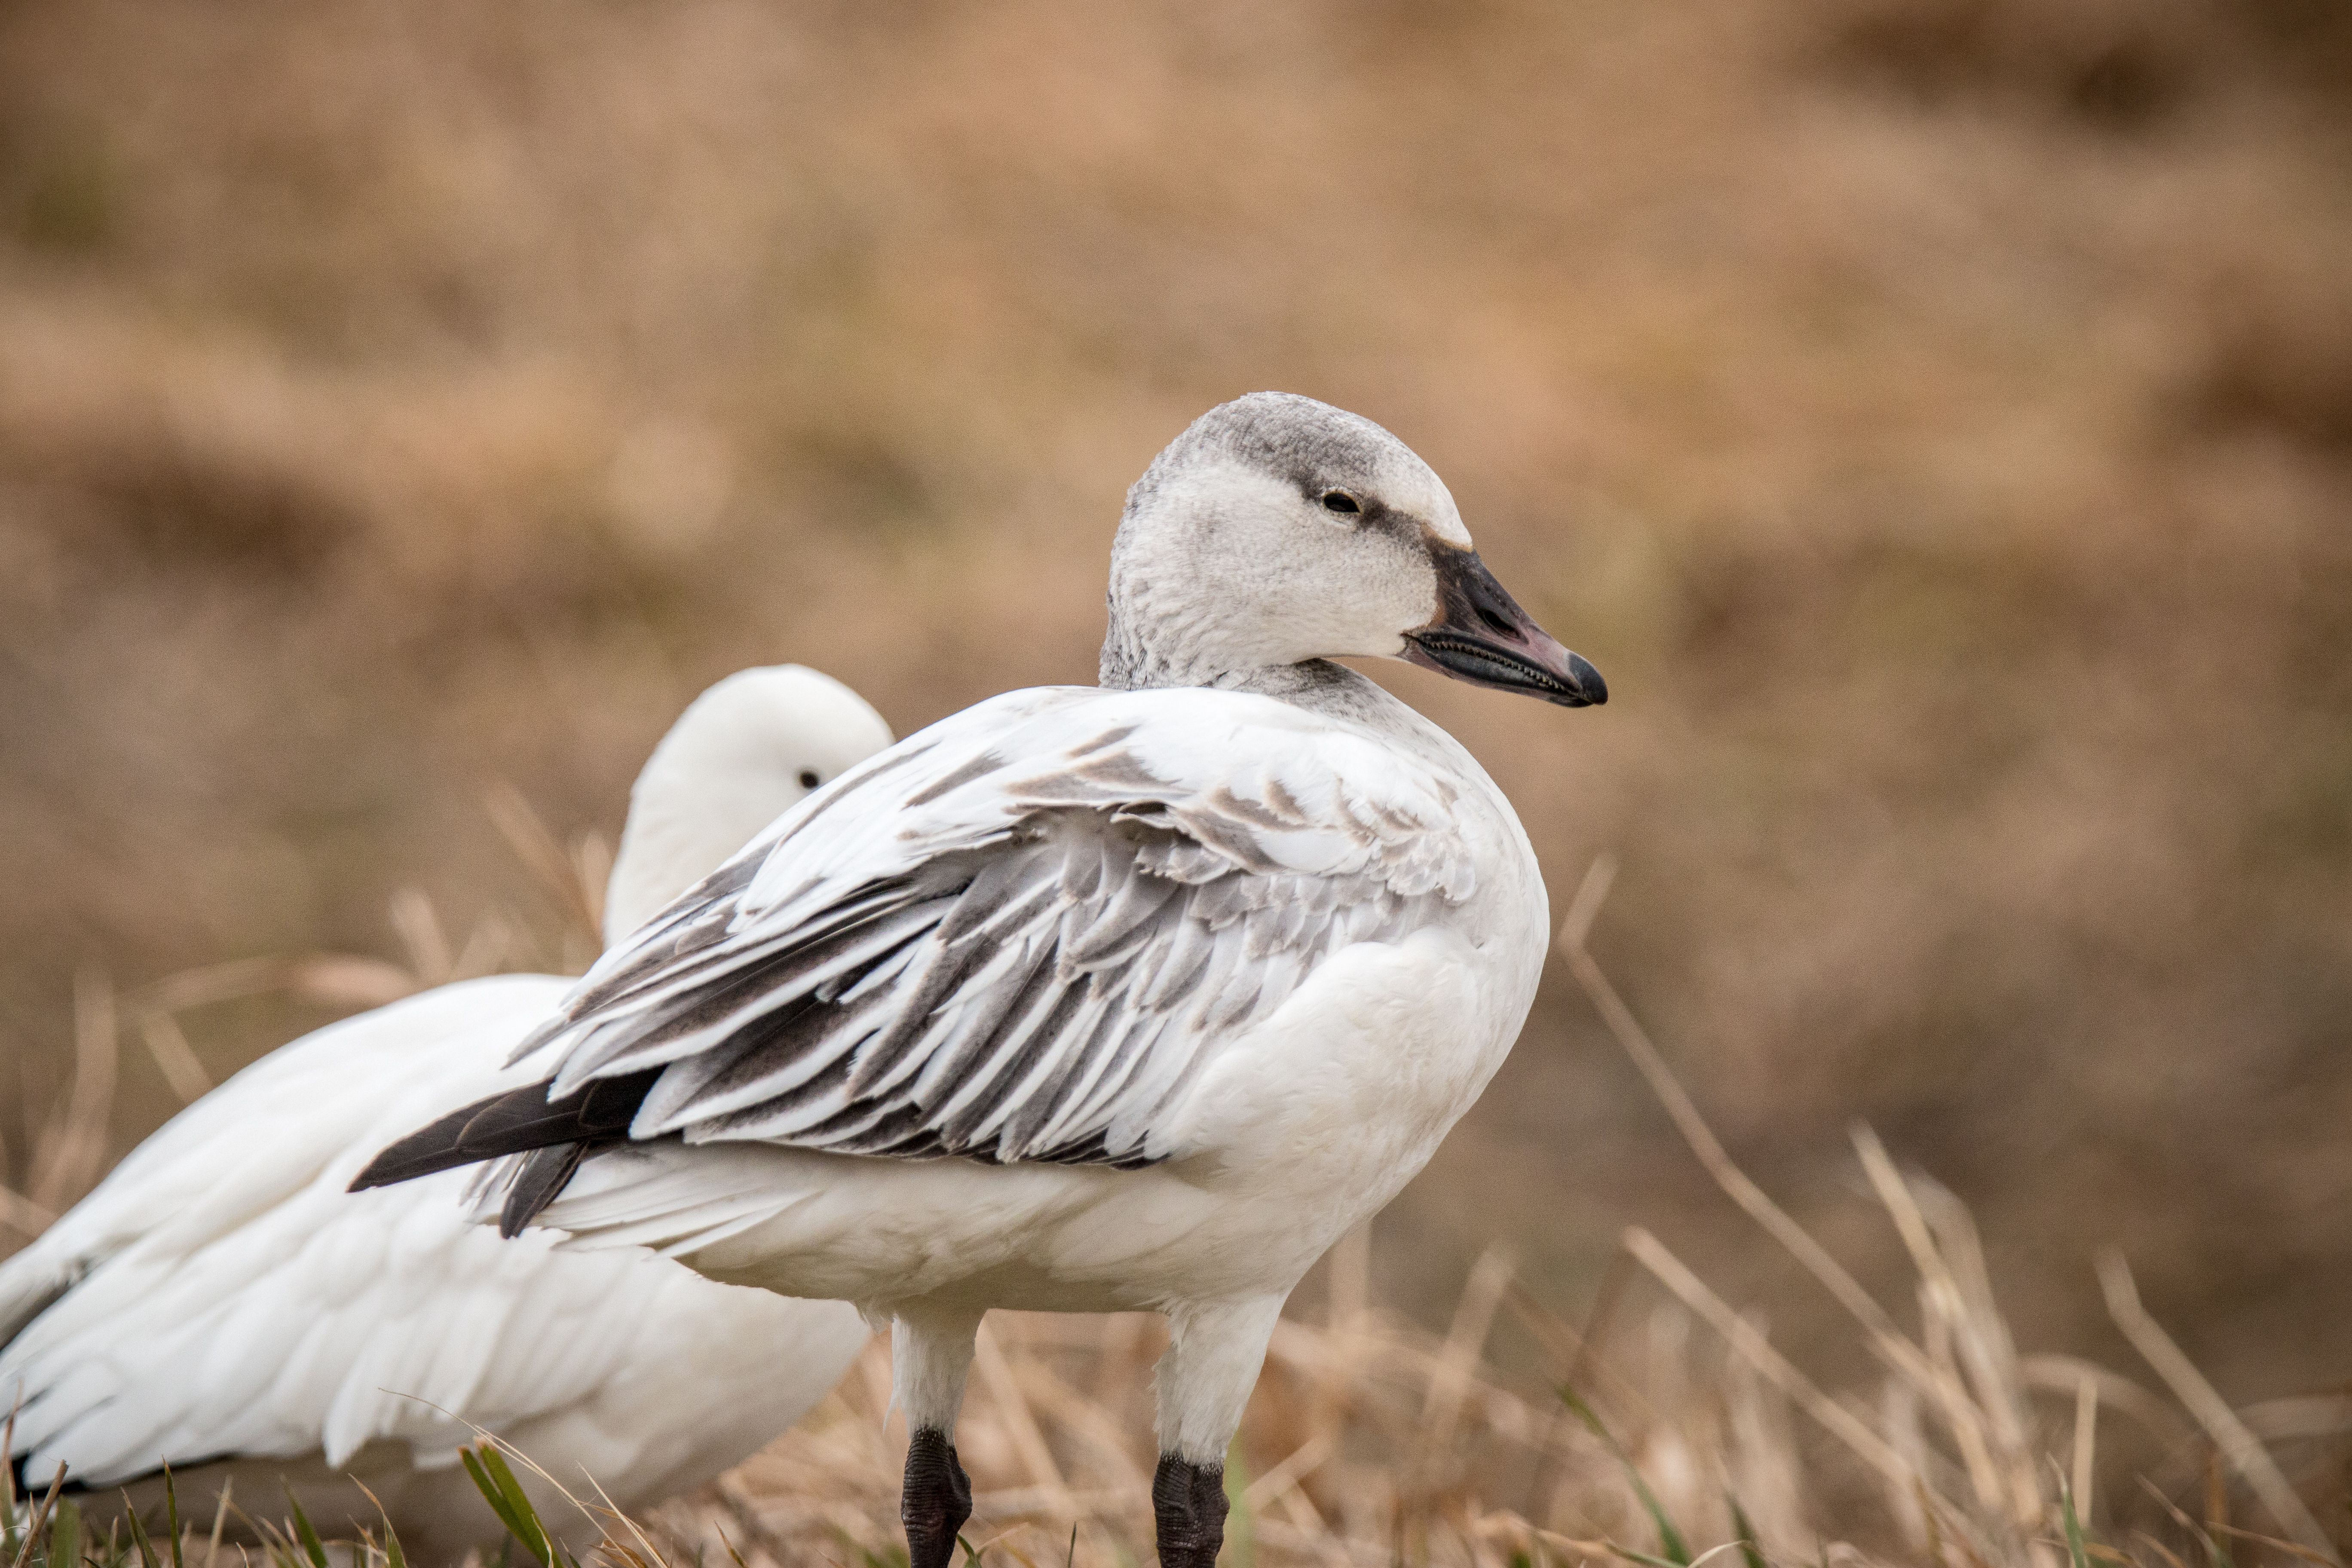 February Field Trip: Snow Geese at DeSoto